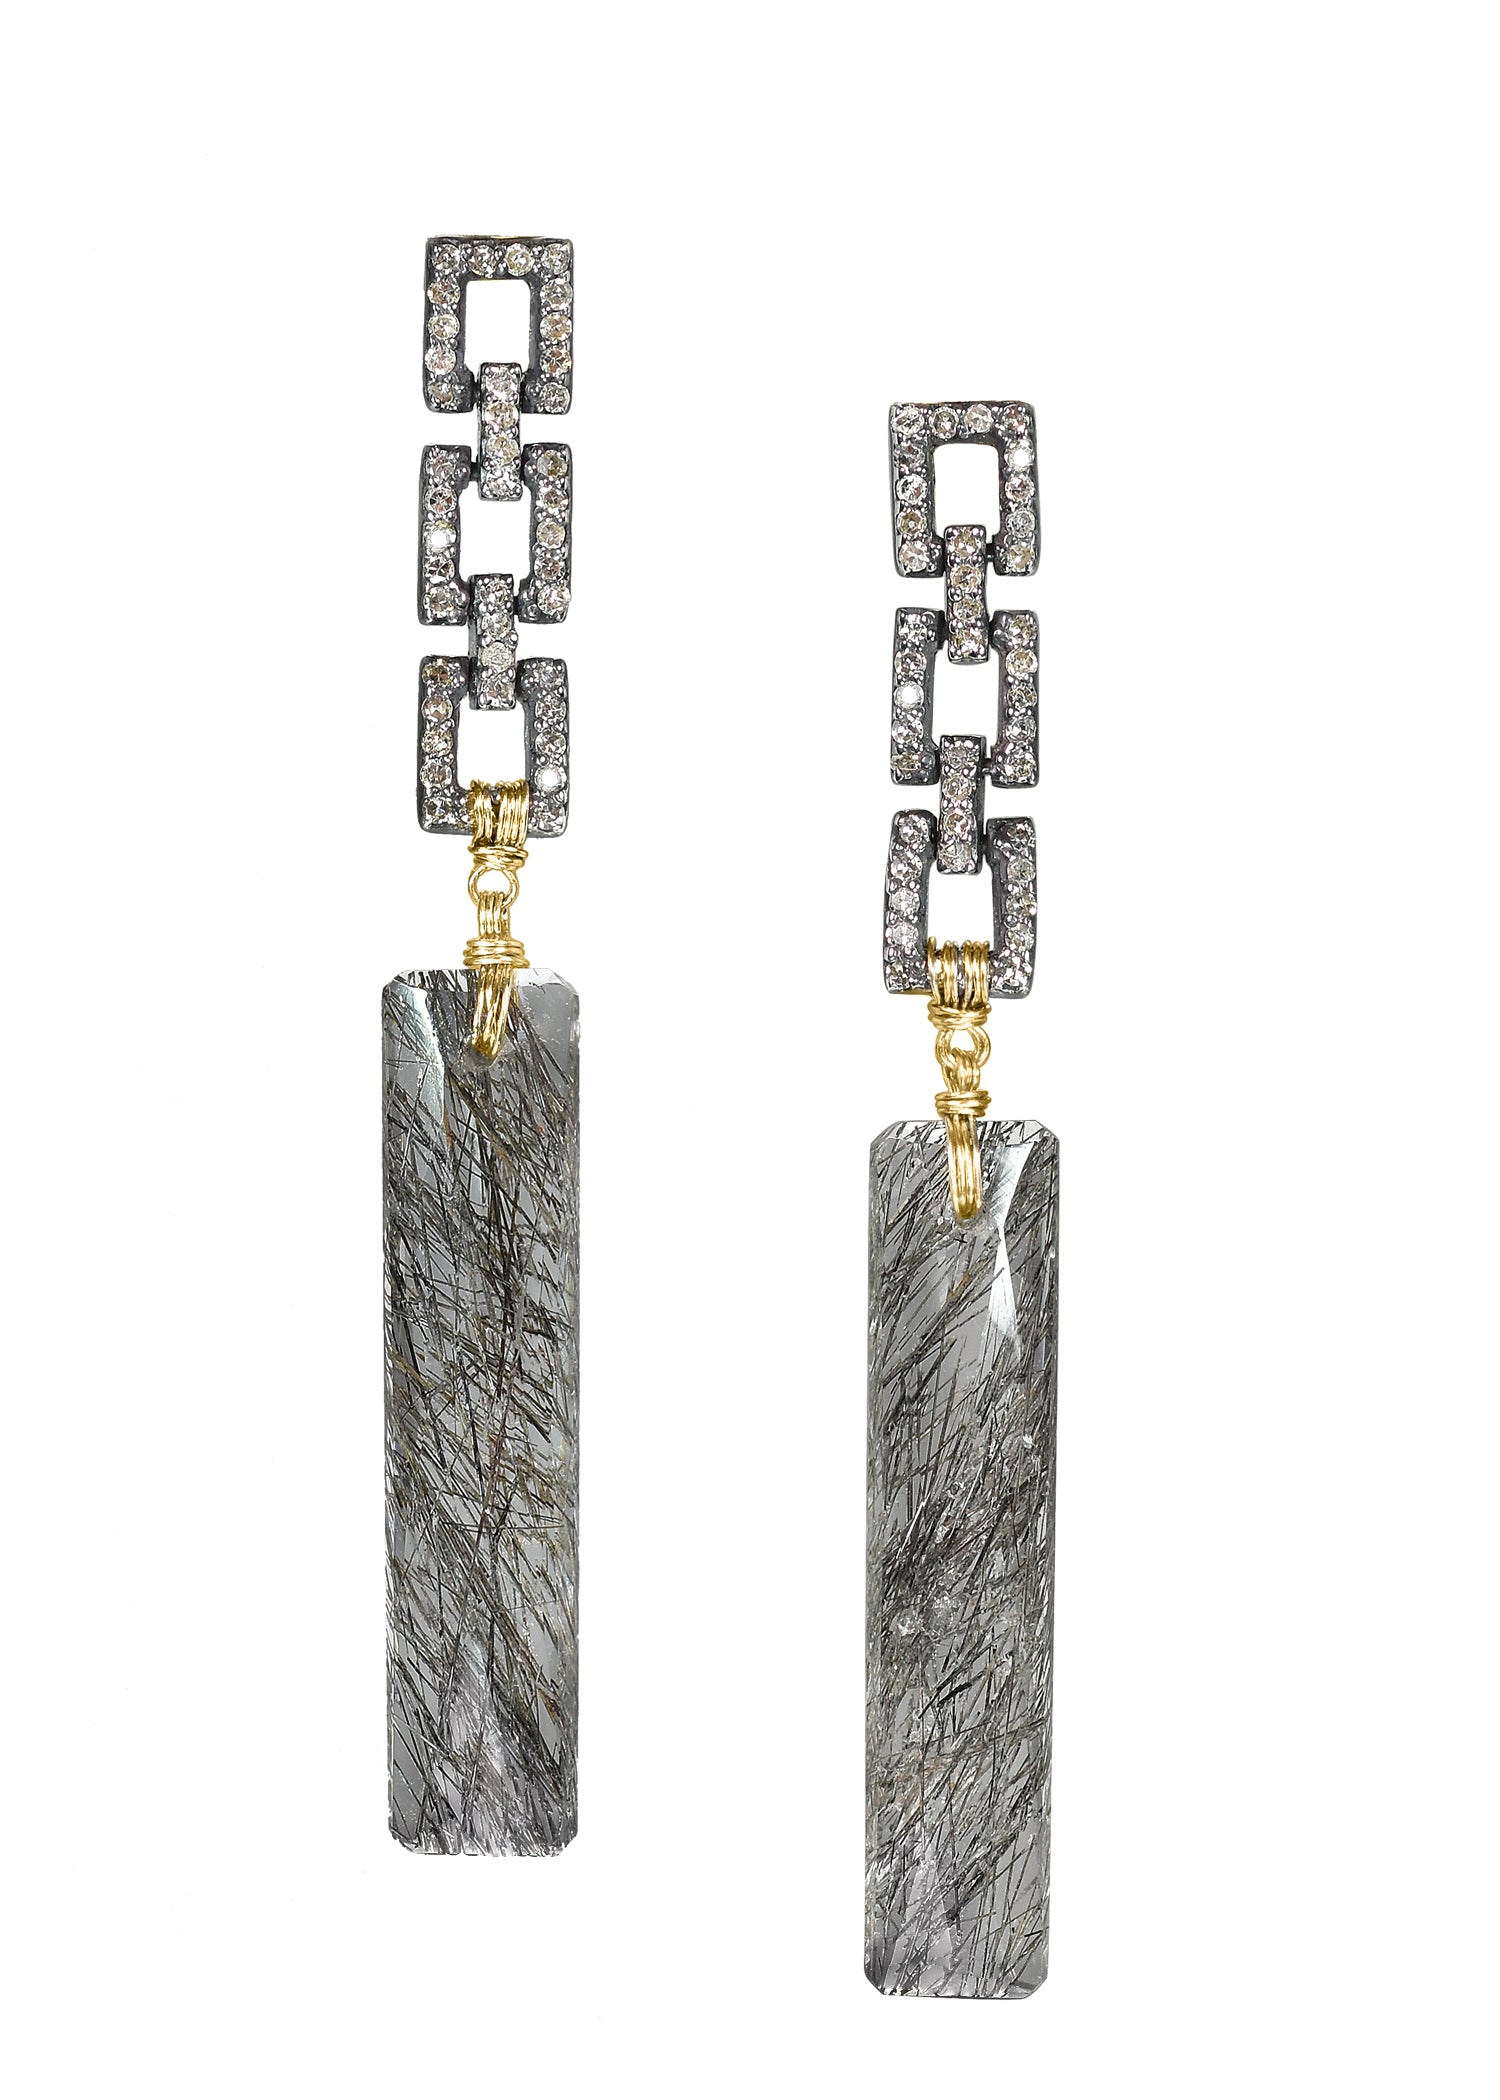 Diamond Black tourmalated quartz 14k gold Sterling silver Mixed metal Special order only Earrings measure 2-1/8" in length (including the posts) and 1/4" in width Handmade in our Los Angeles studio